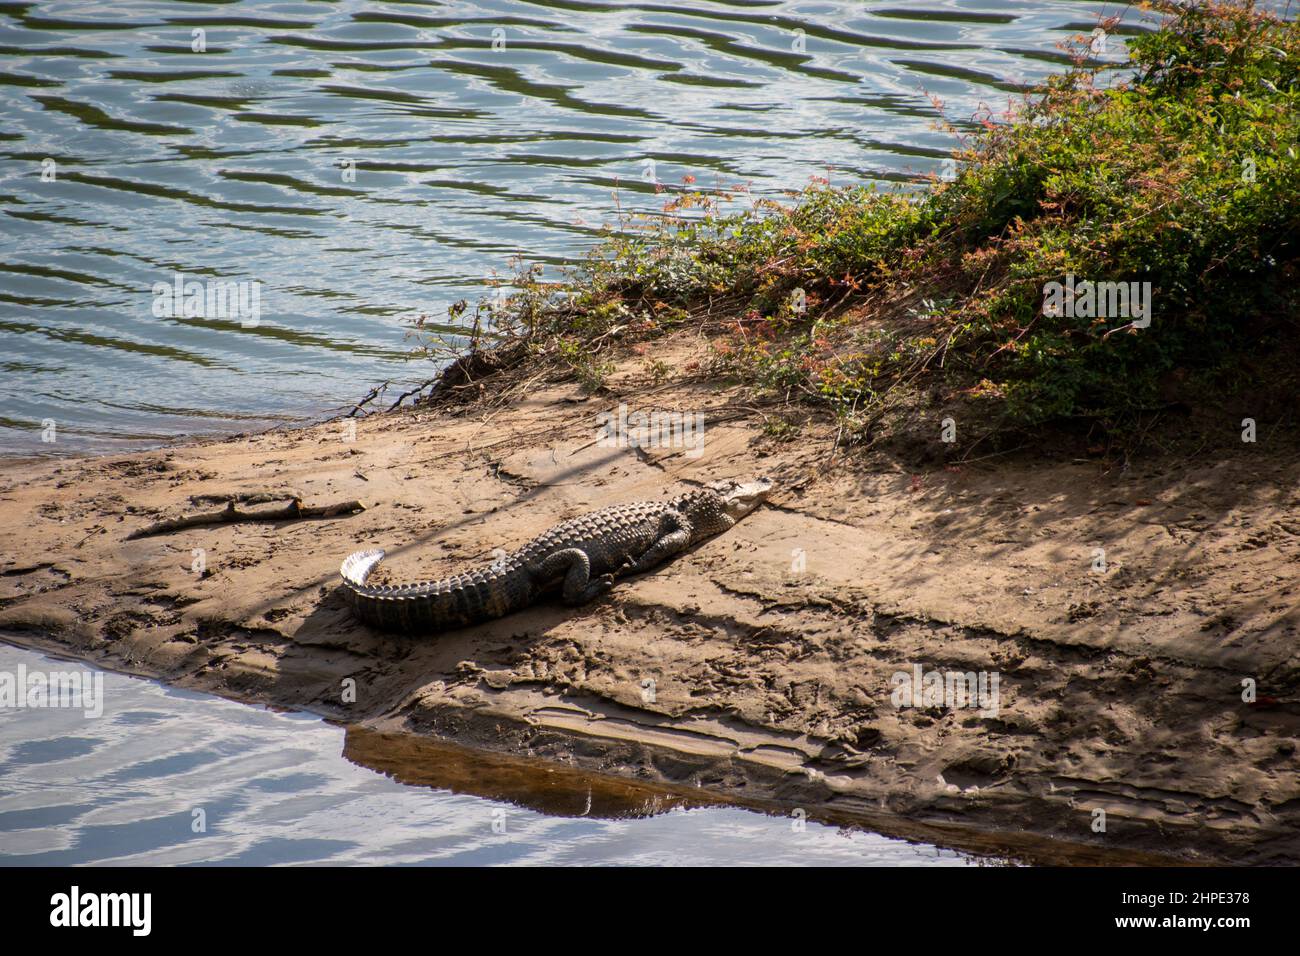 A single American alligator sunbathing on the banks of the Broad River in Columbia, SC Stock Photo